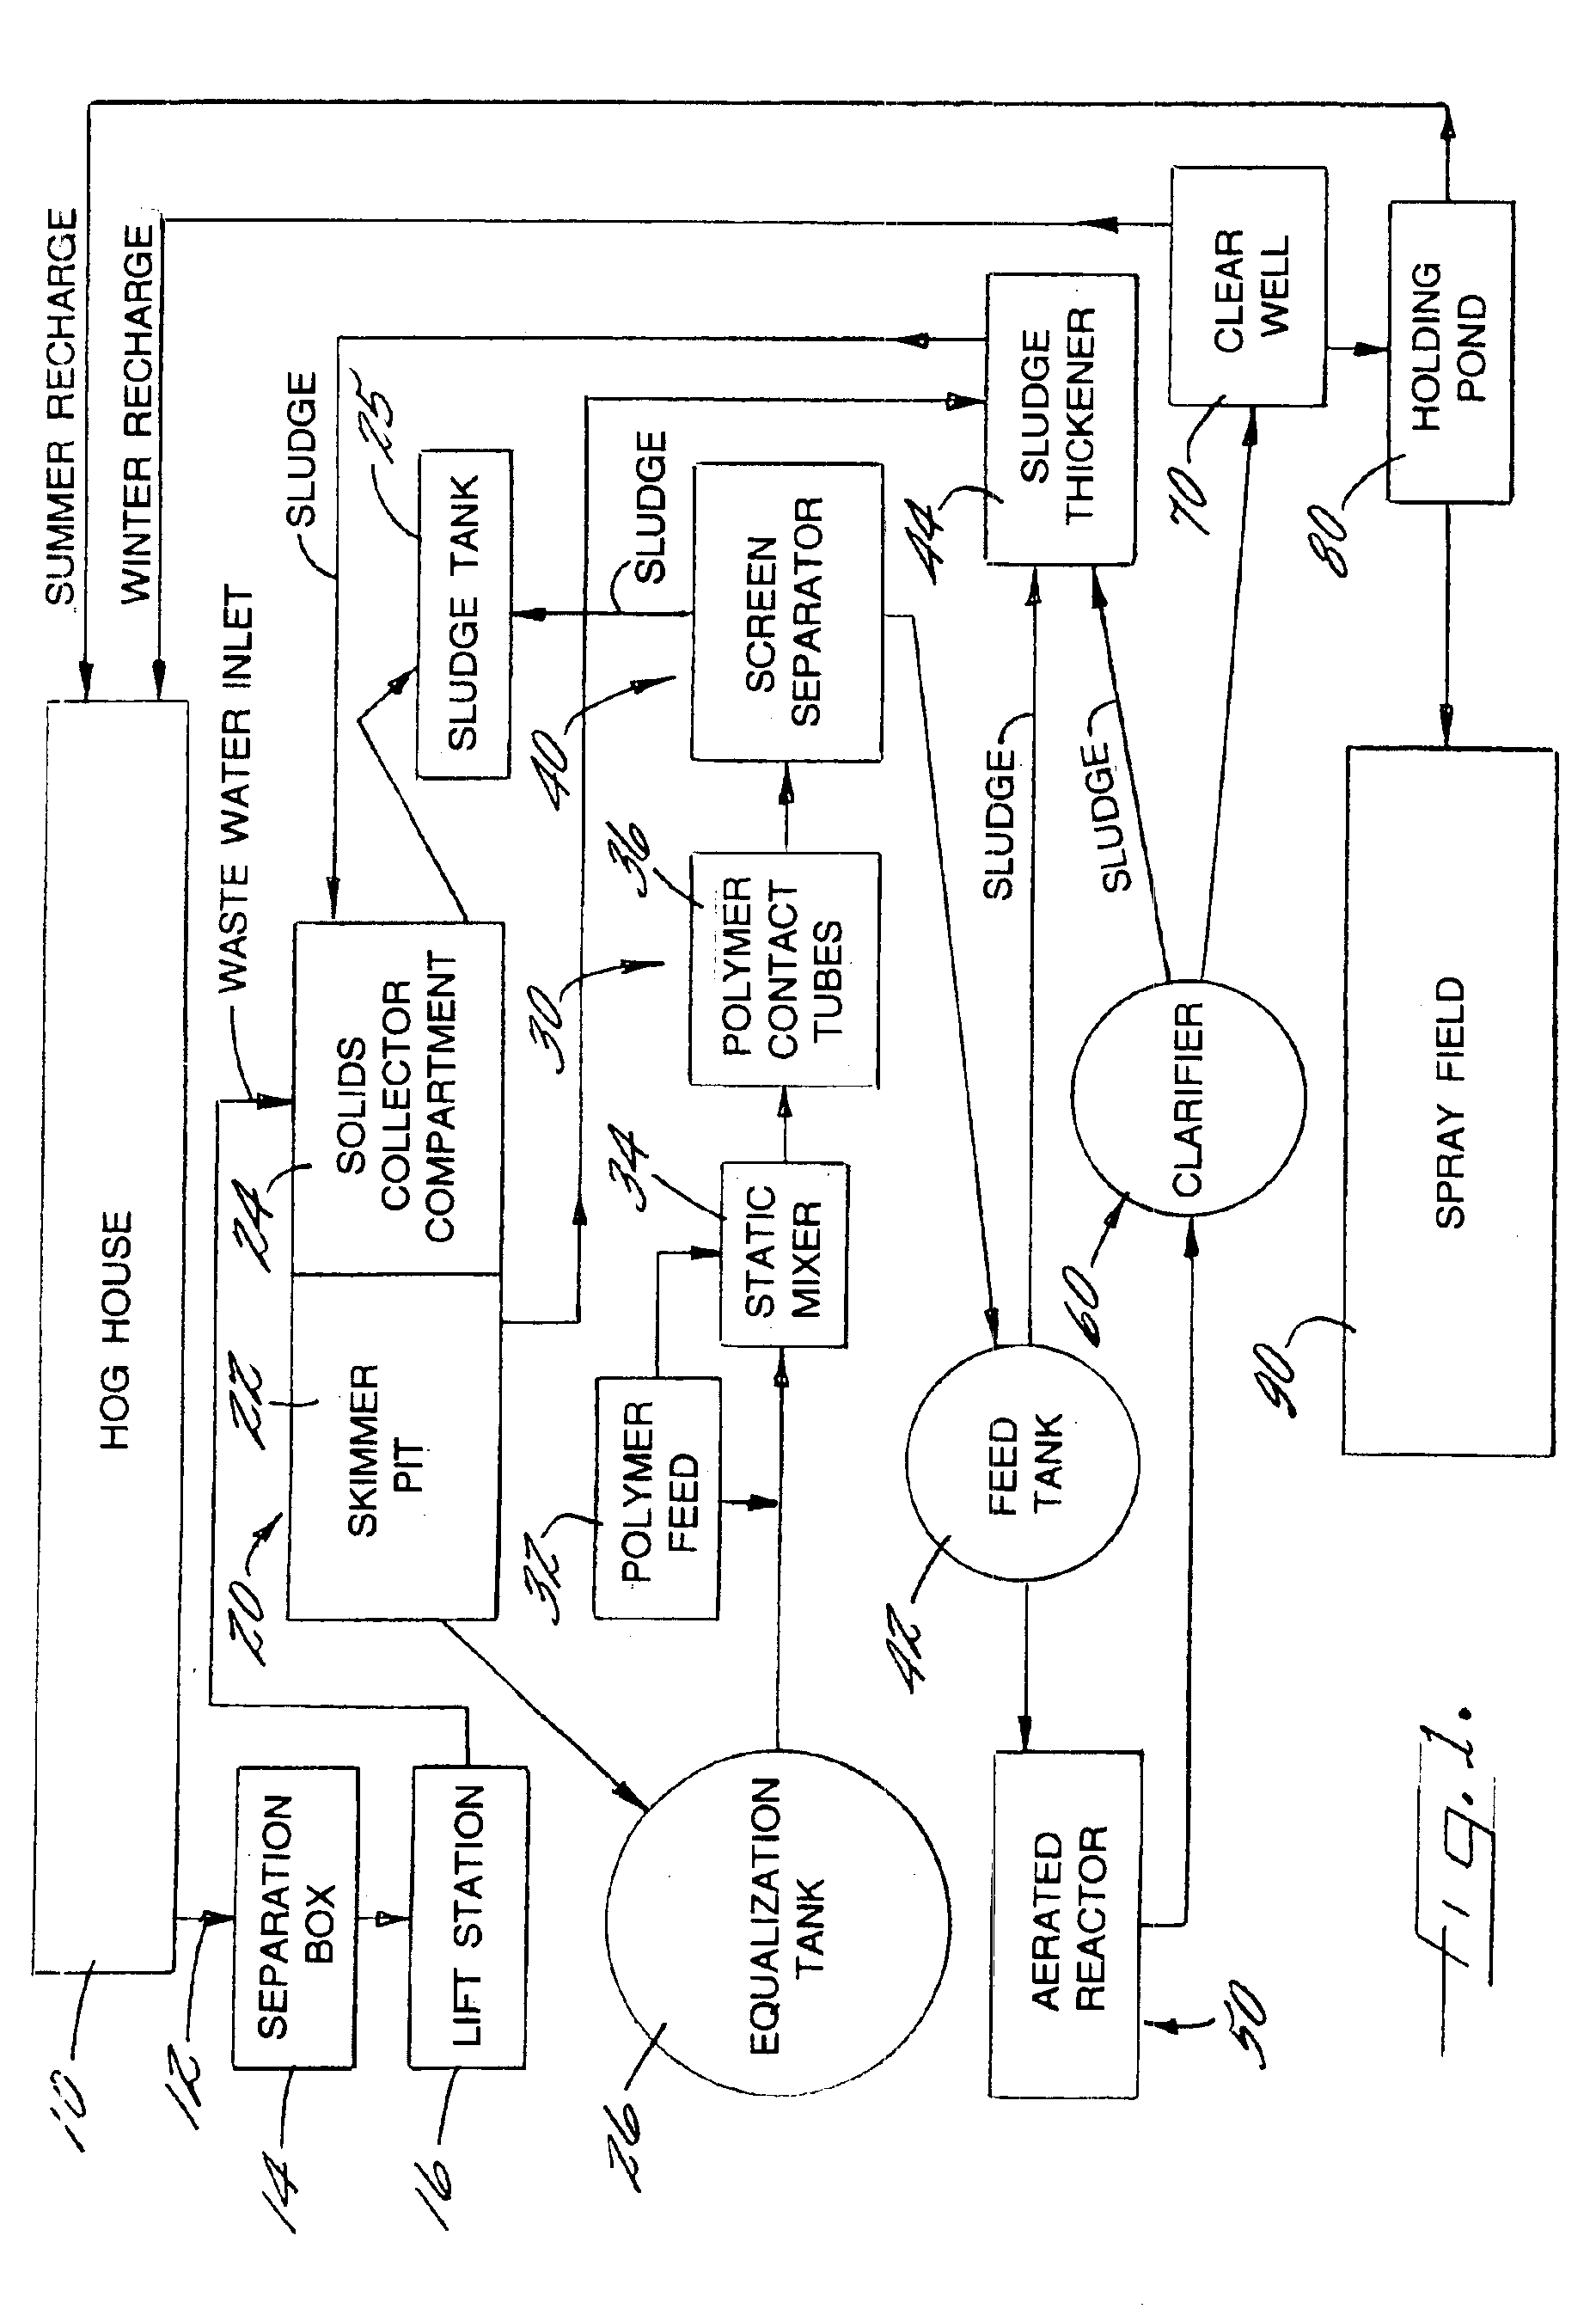 Systems and methods for treating waste water